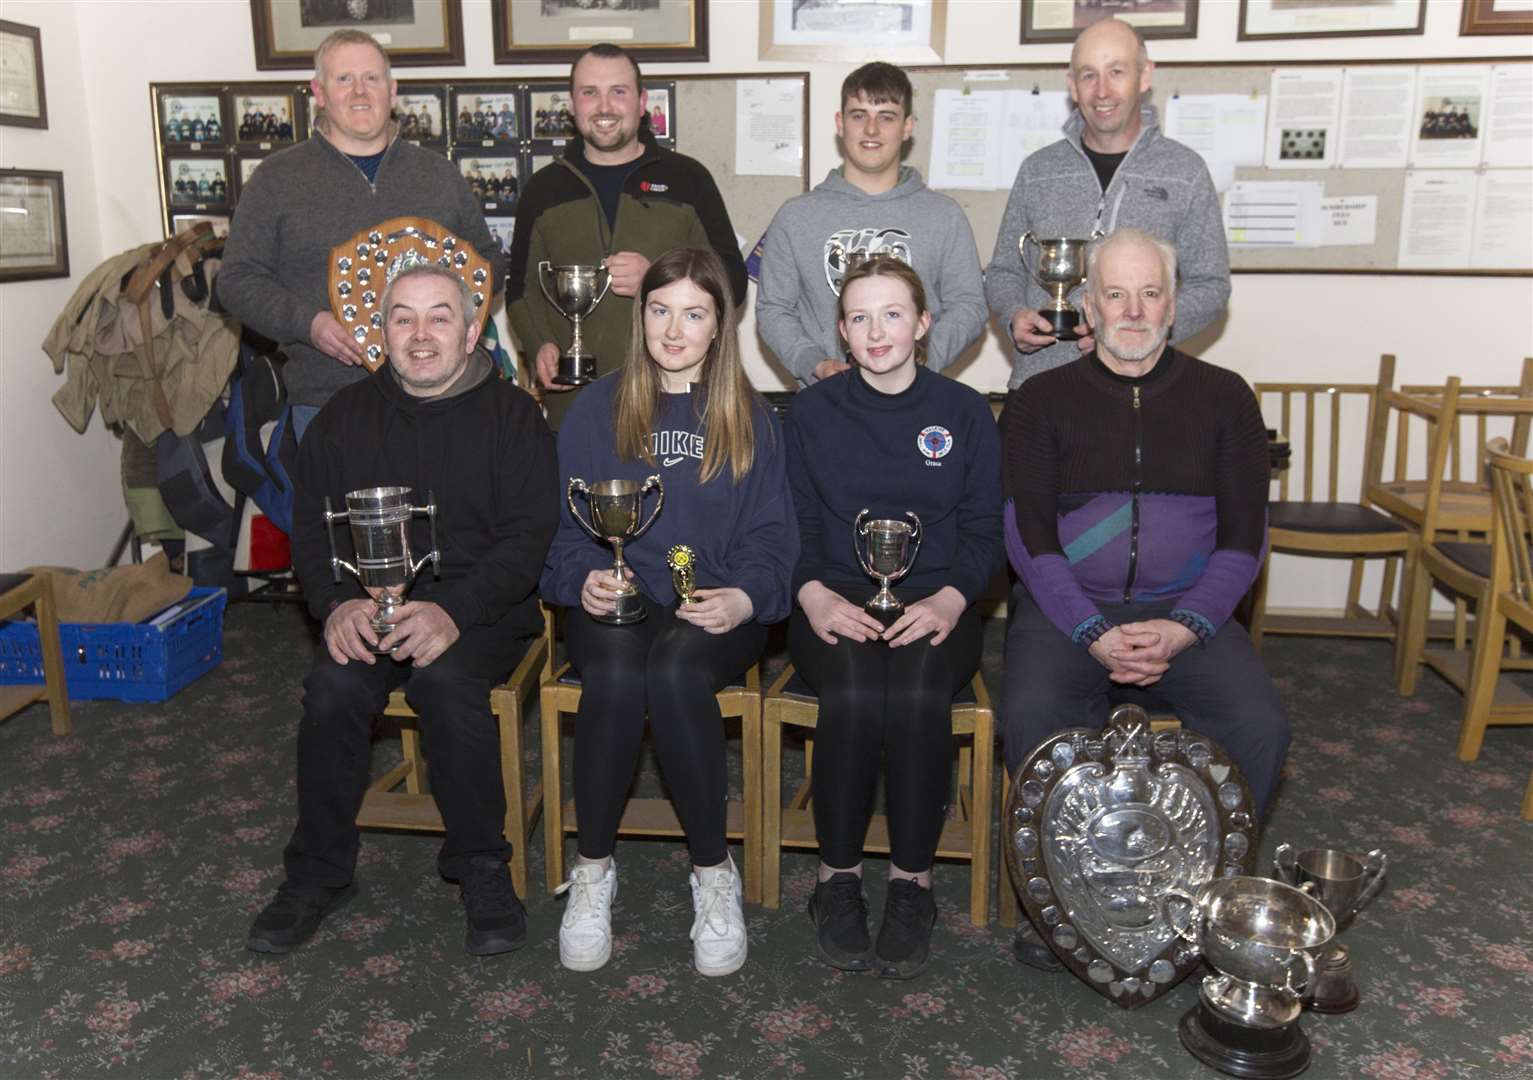 With Caithness Small Bore Rifle Association's indoor season drawing to a close, league and team trophies were presented at Stirkoke Rifle Club following the St Clair Cup competition which was won by Halkirk 'A'. Some of the shooters who accepted trophies on behalf of themselves or their clubs and teams are (back, from left) Graham Mackay, Mark Mackay, both Westfield, Robbie Levack, Robbie Campbell, both Halkirk, (front) Steven Nicolson, Wick Old Stagers, Sophie Campbell, Grace Campbell, both Halkirk, and Brian Young, Wick Old Stagers. Picture: Robert MacDonald / Northern Studios